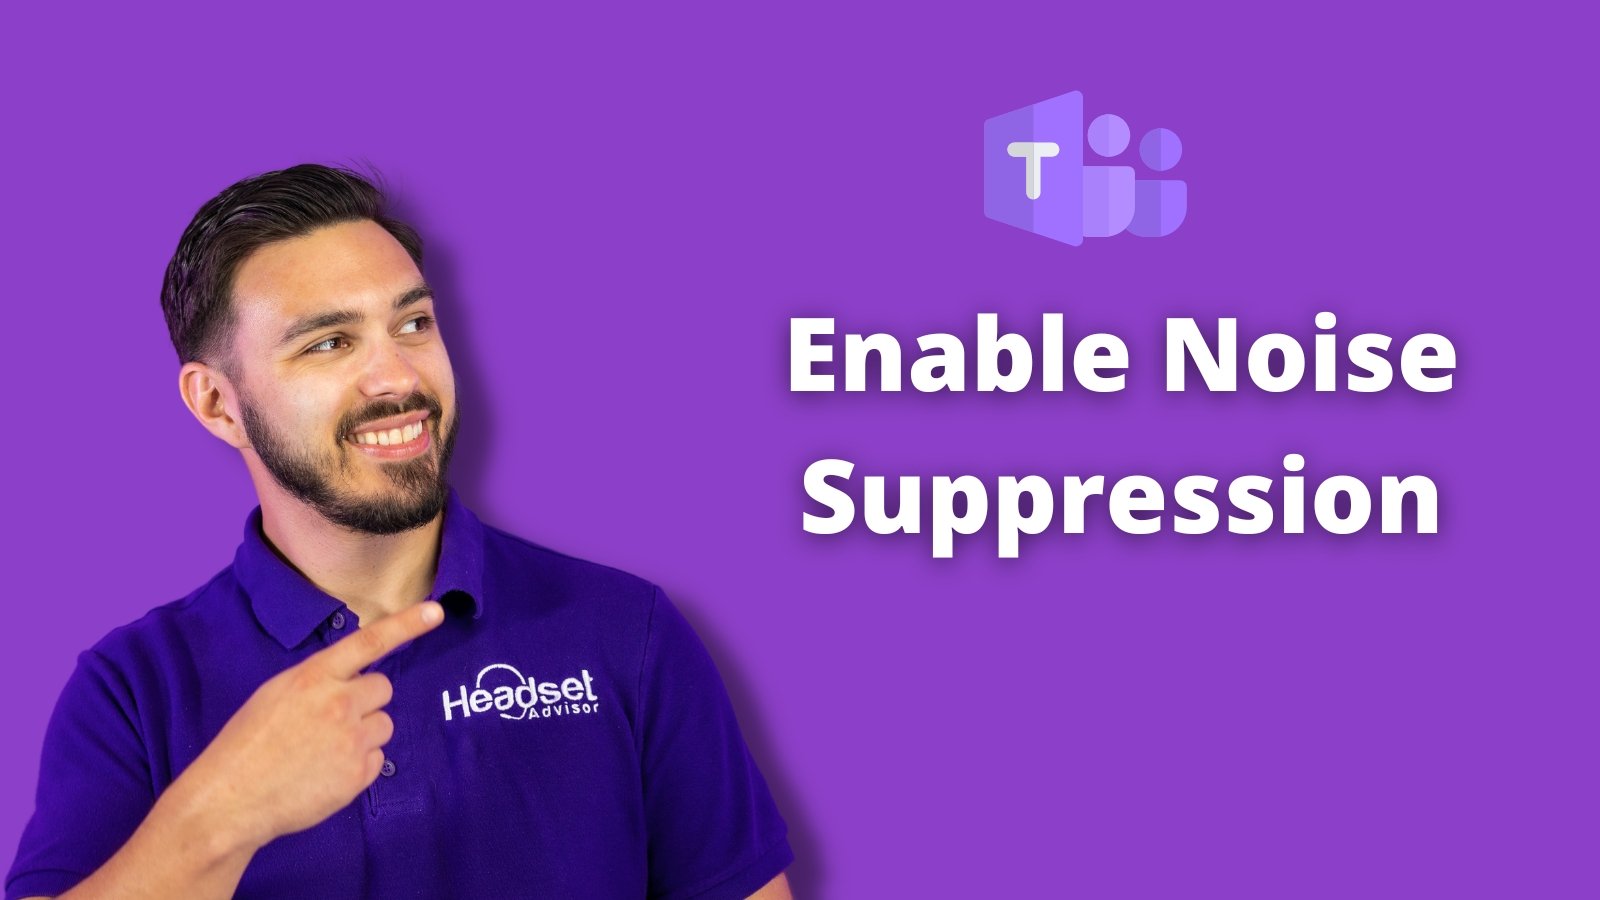 How To Enable Teams Noise Suppression & Tips - Headset Advisor